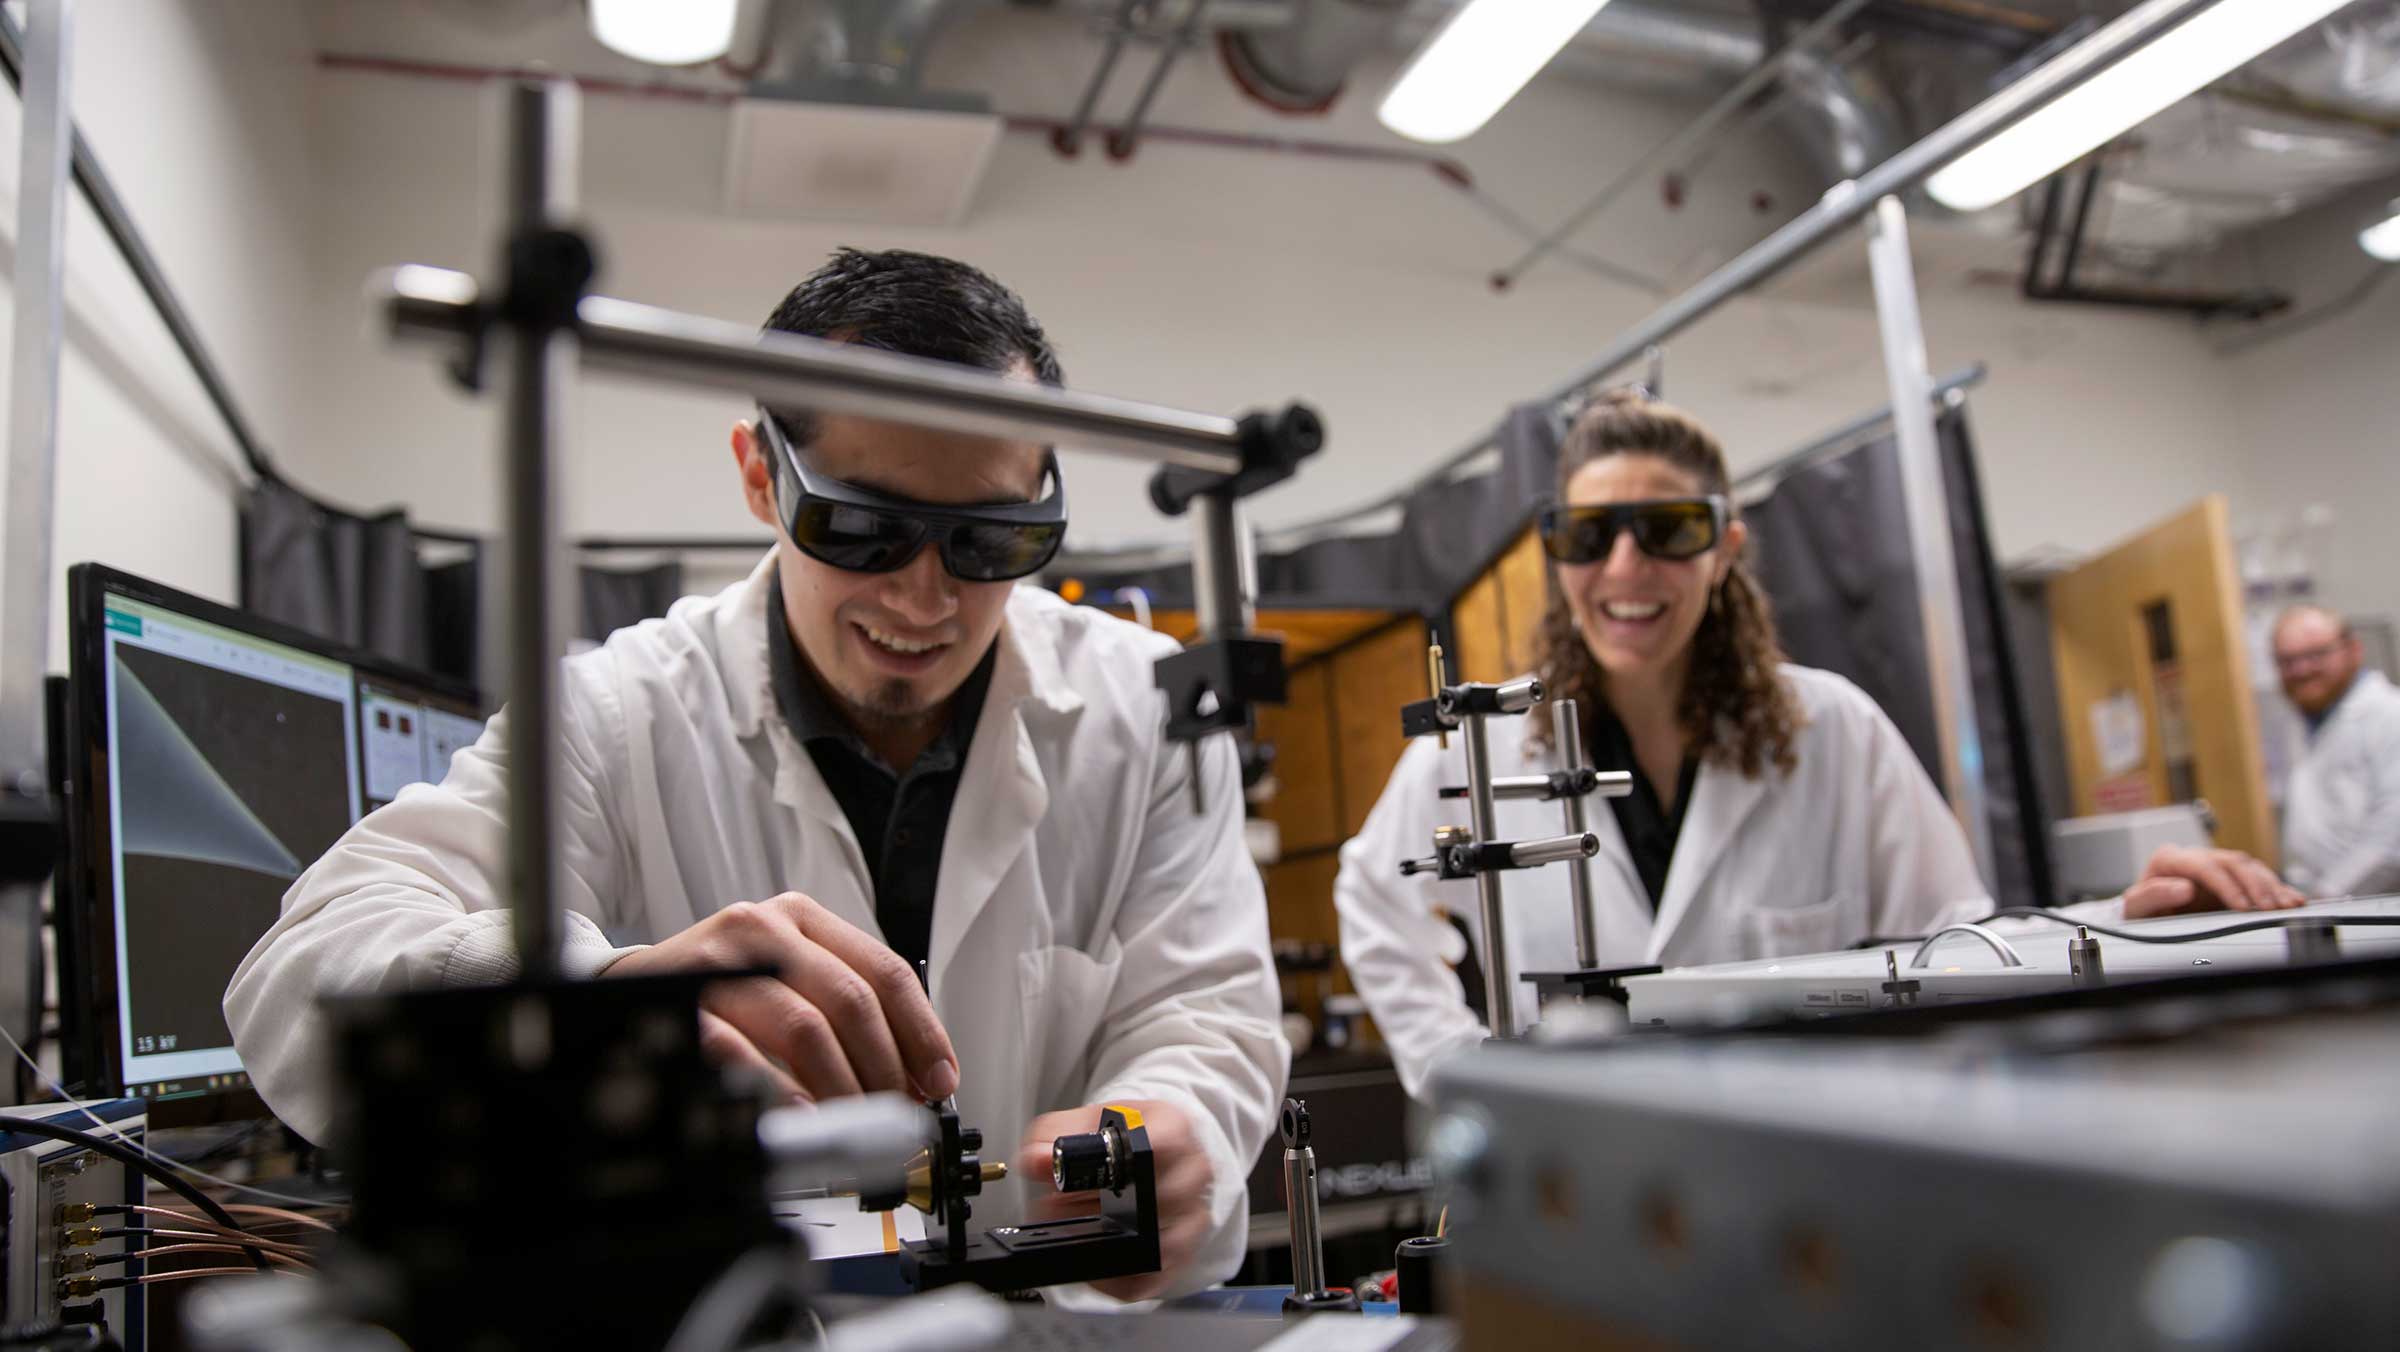 A graduate student in Barbara Smith works at the bench while Barbara looks on. Both are wearing protective clothing and dark glasses.